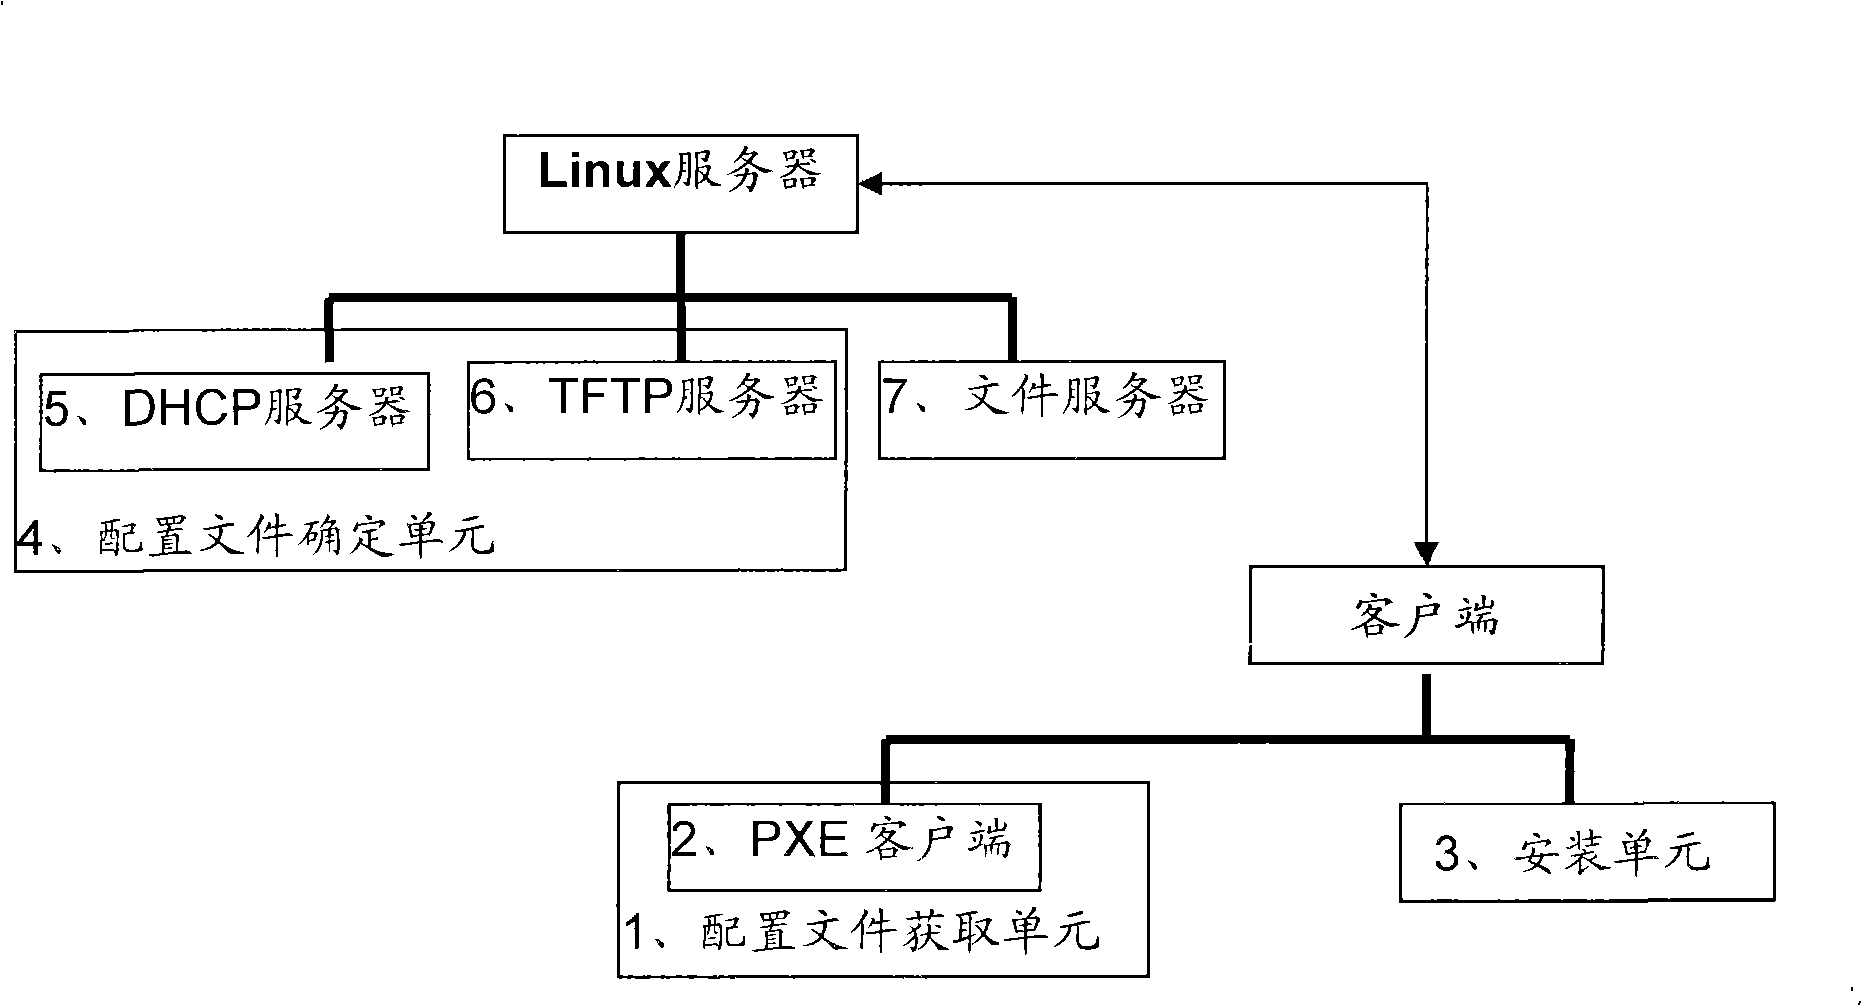 Method, device and system for allocating WINDOWS enterprise edition operating system